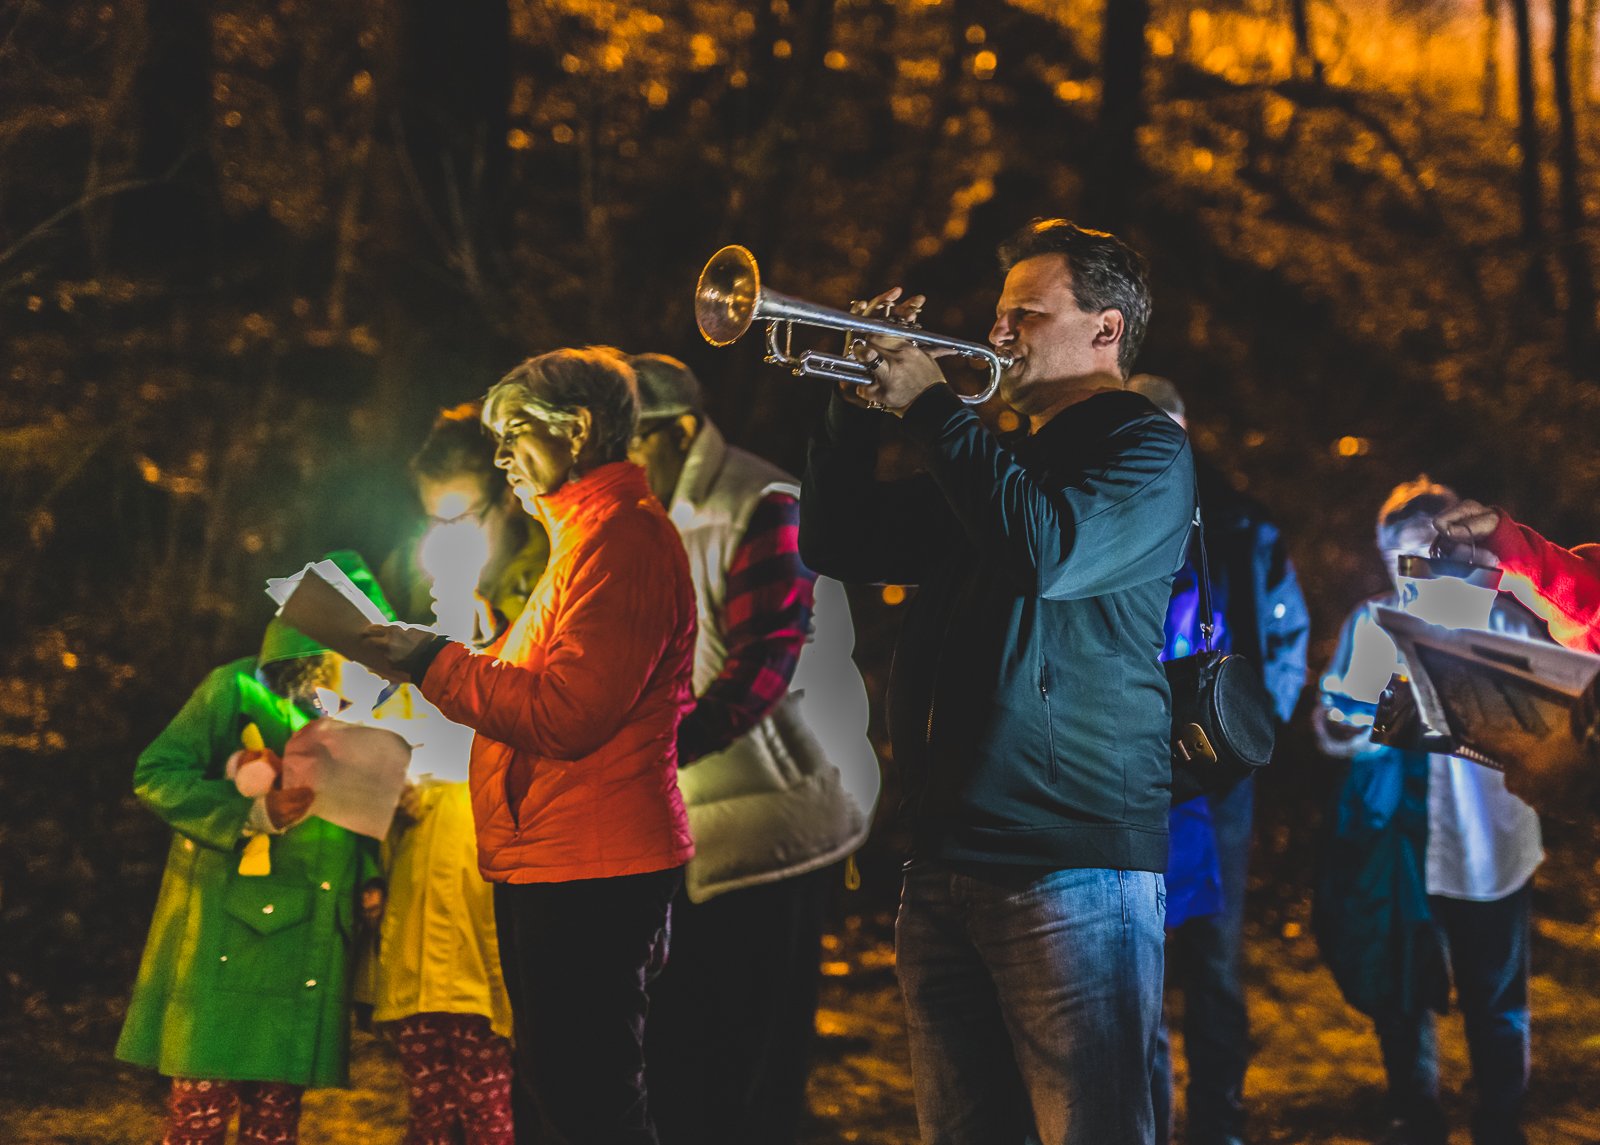 A man plays a trumpet while others hold papers with lyrics at a Winter Solstice event at the Karl Stirner Arts Trail in Easton, Pennsylvania.